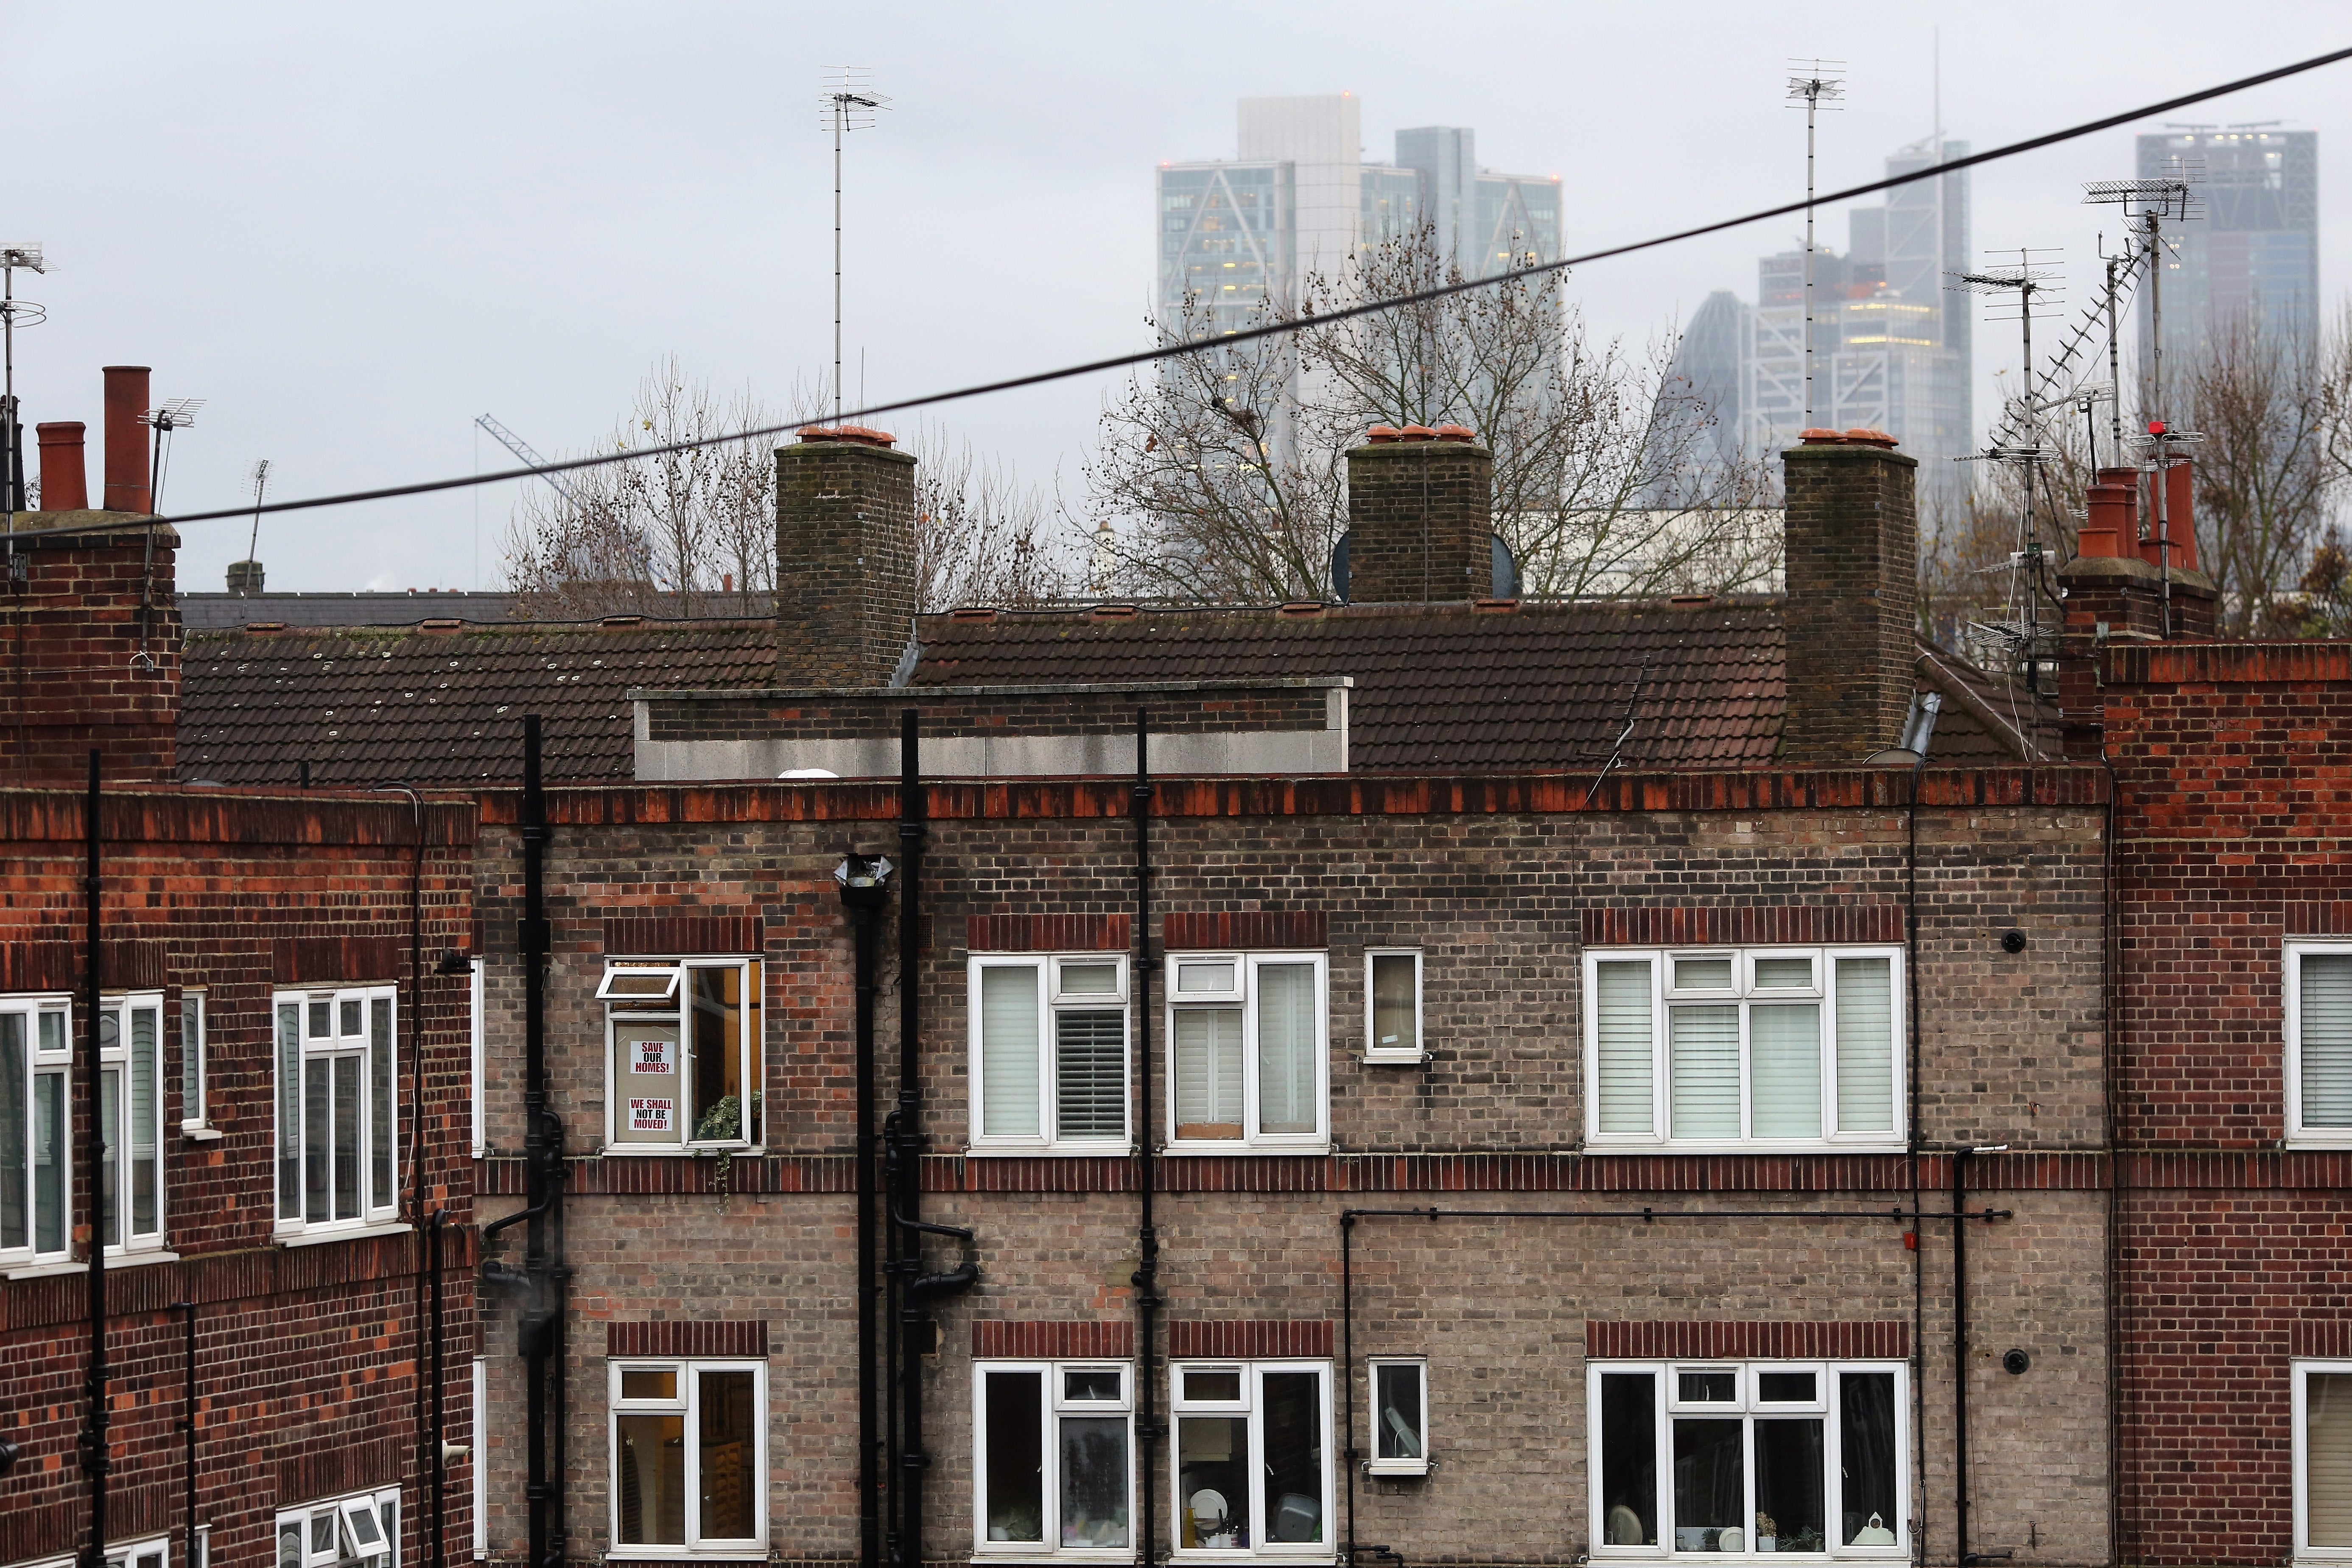 A fifth of renters in England are being harmed by their living conditions, the survey found